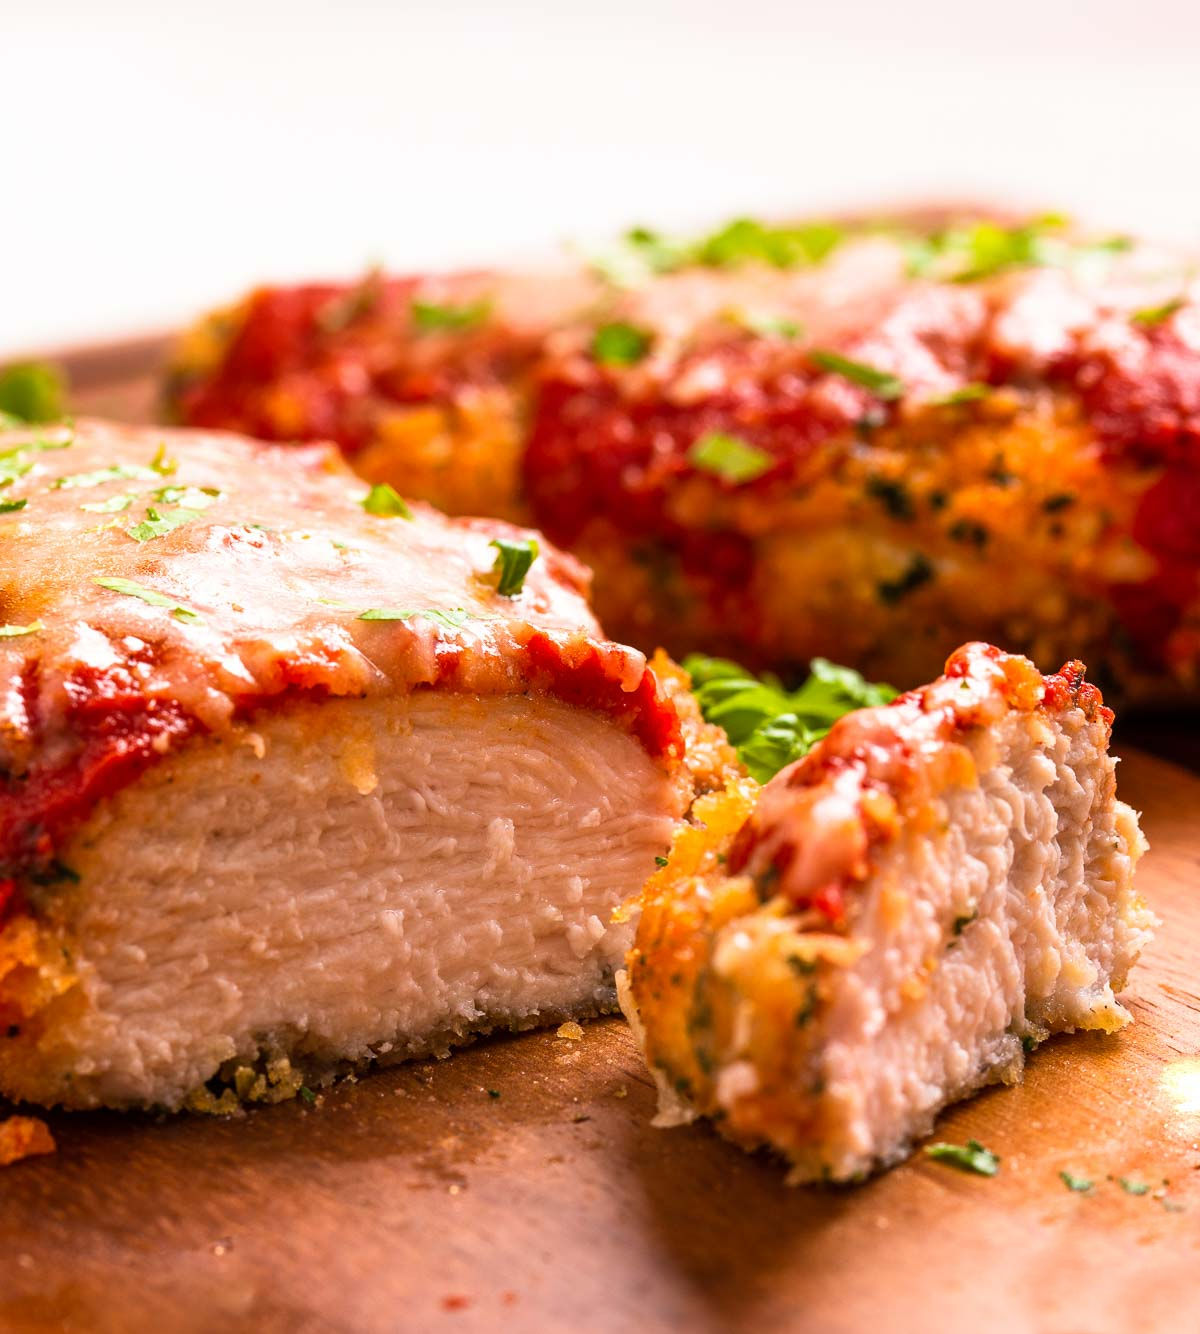 Two low carb breaded and air-fried chicken parmesan cutlets with marinara sauce and cheese.